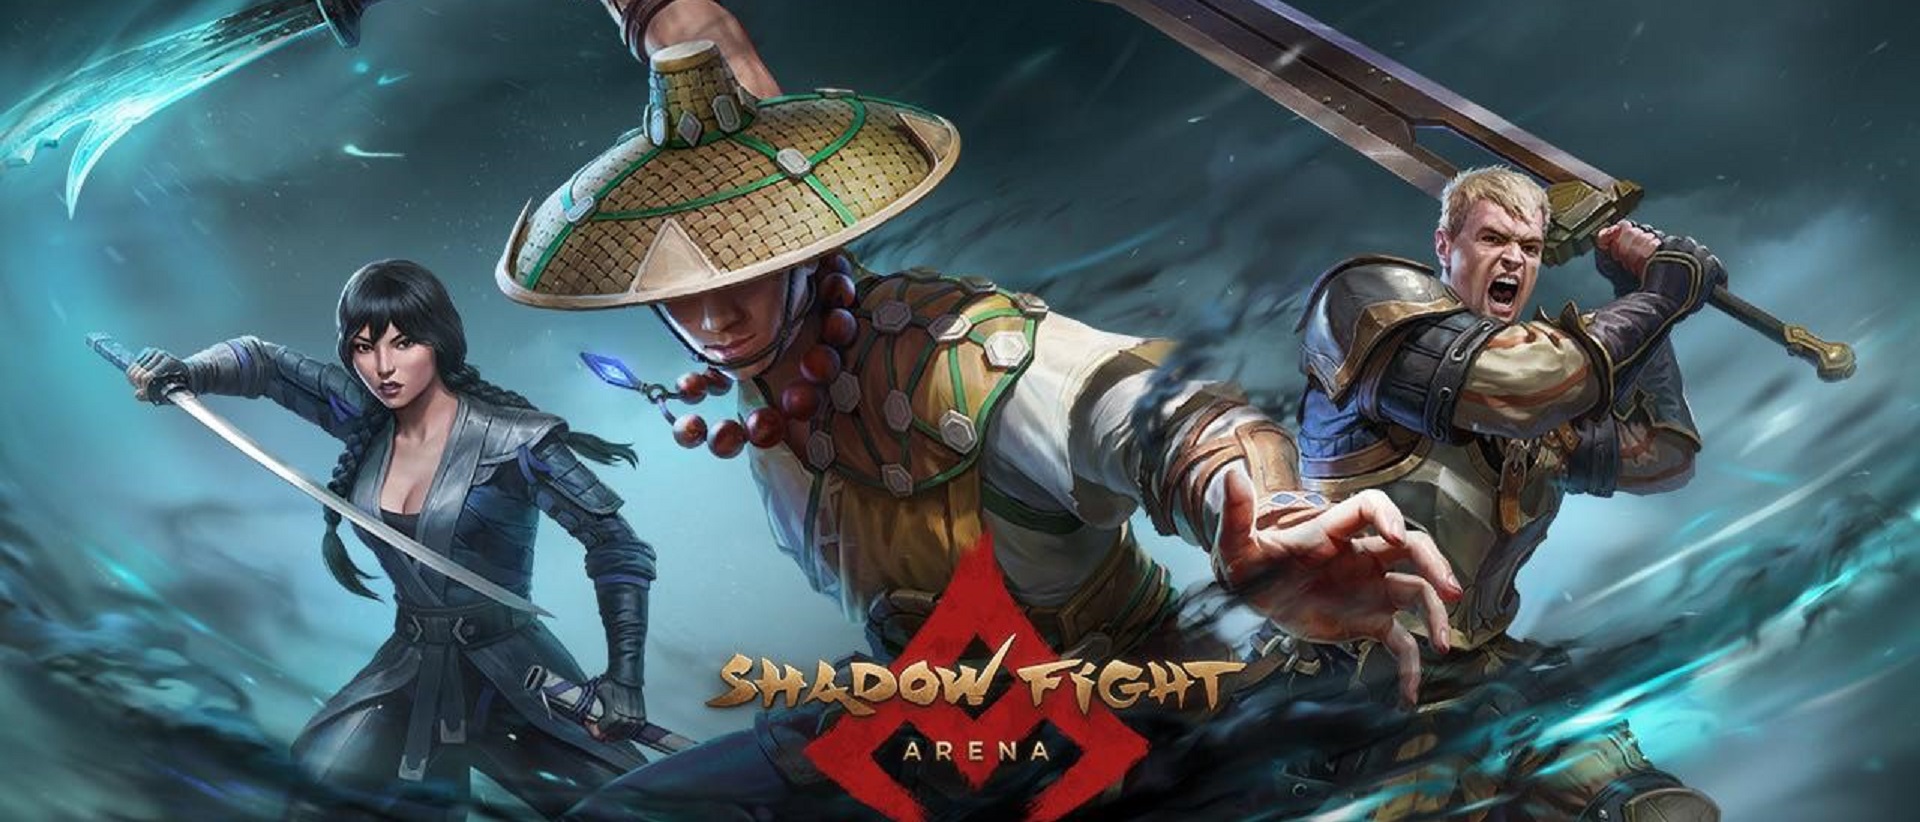 download shadow fight 4 pvp arena